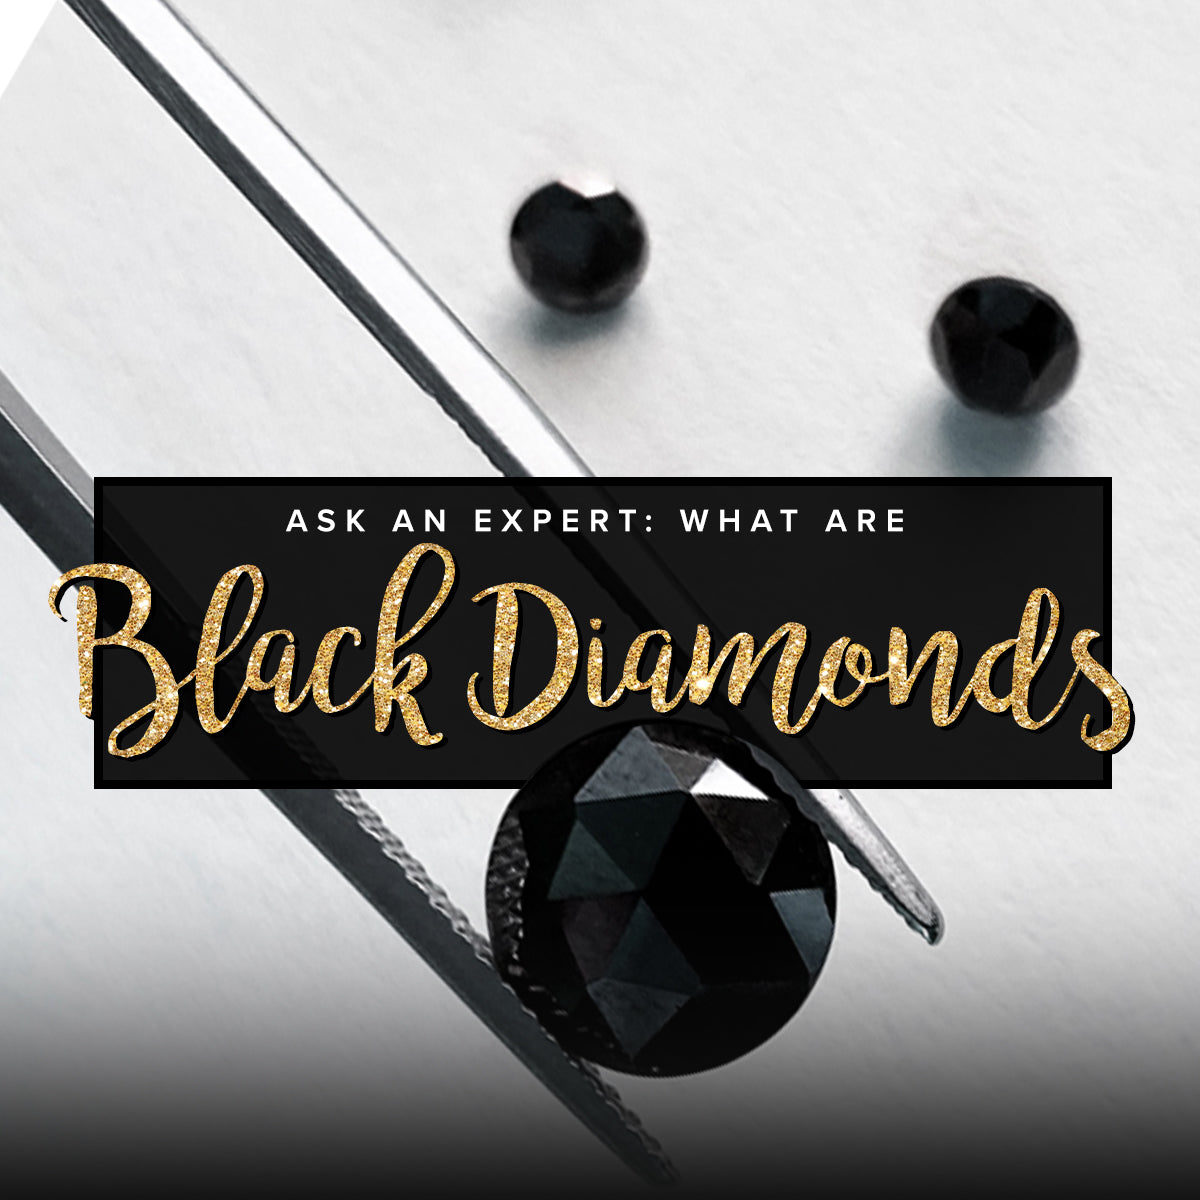 A black diamond backround with the text "Ask an Expert: What are Black Diamonds?"